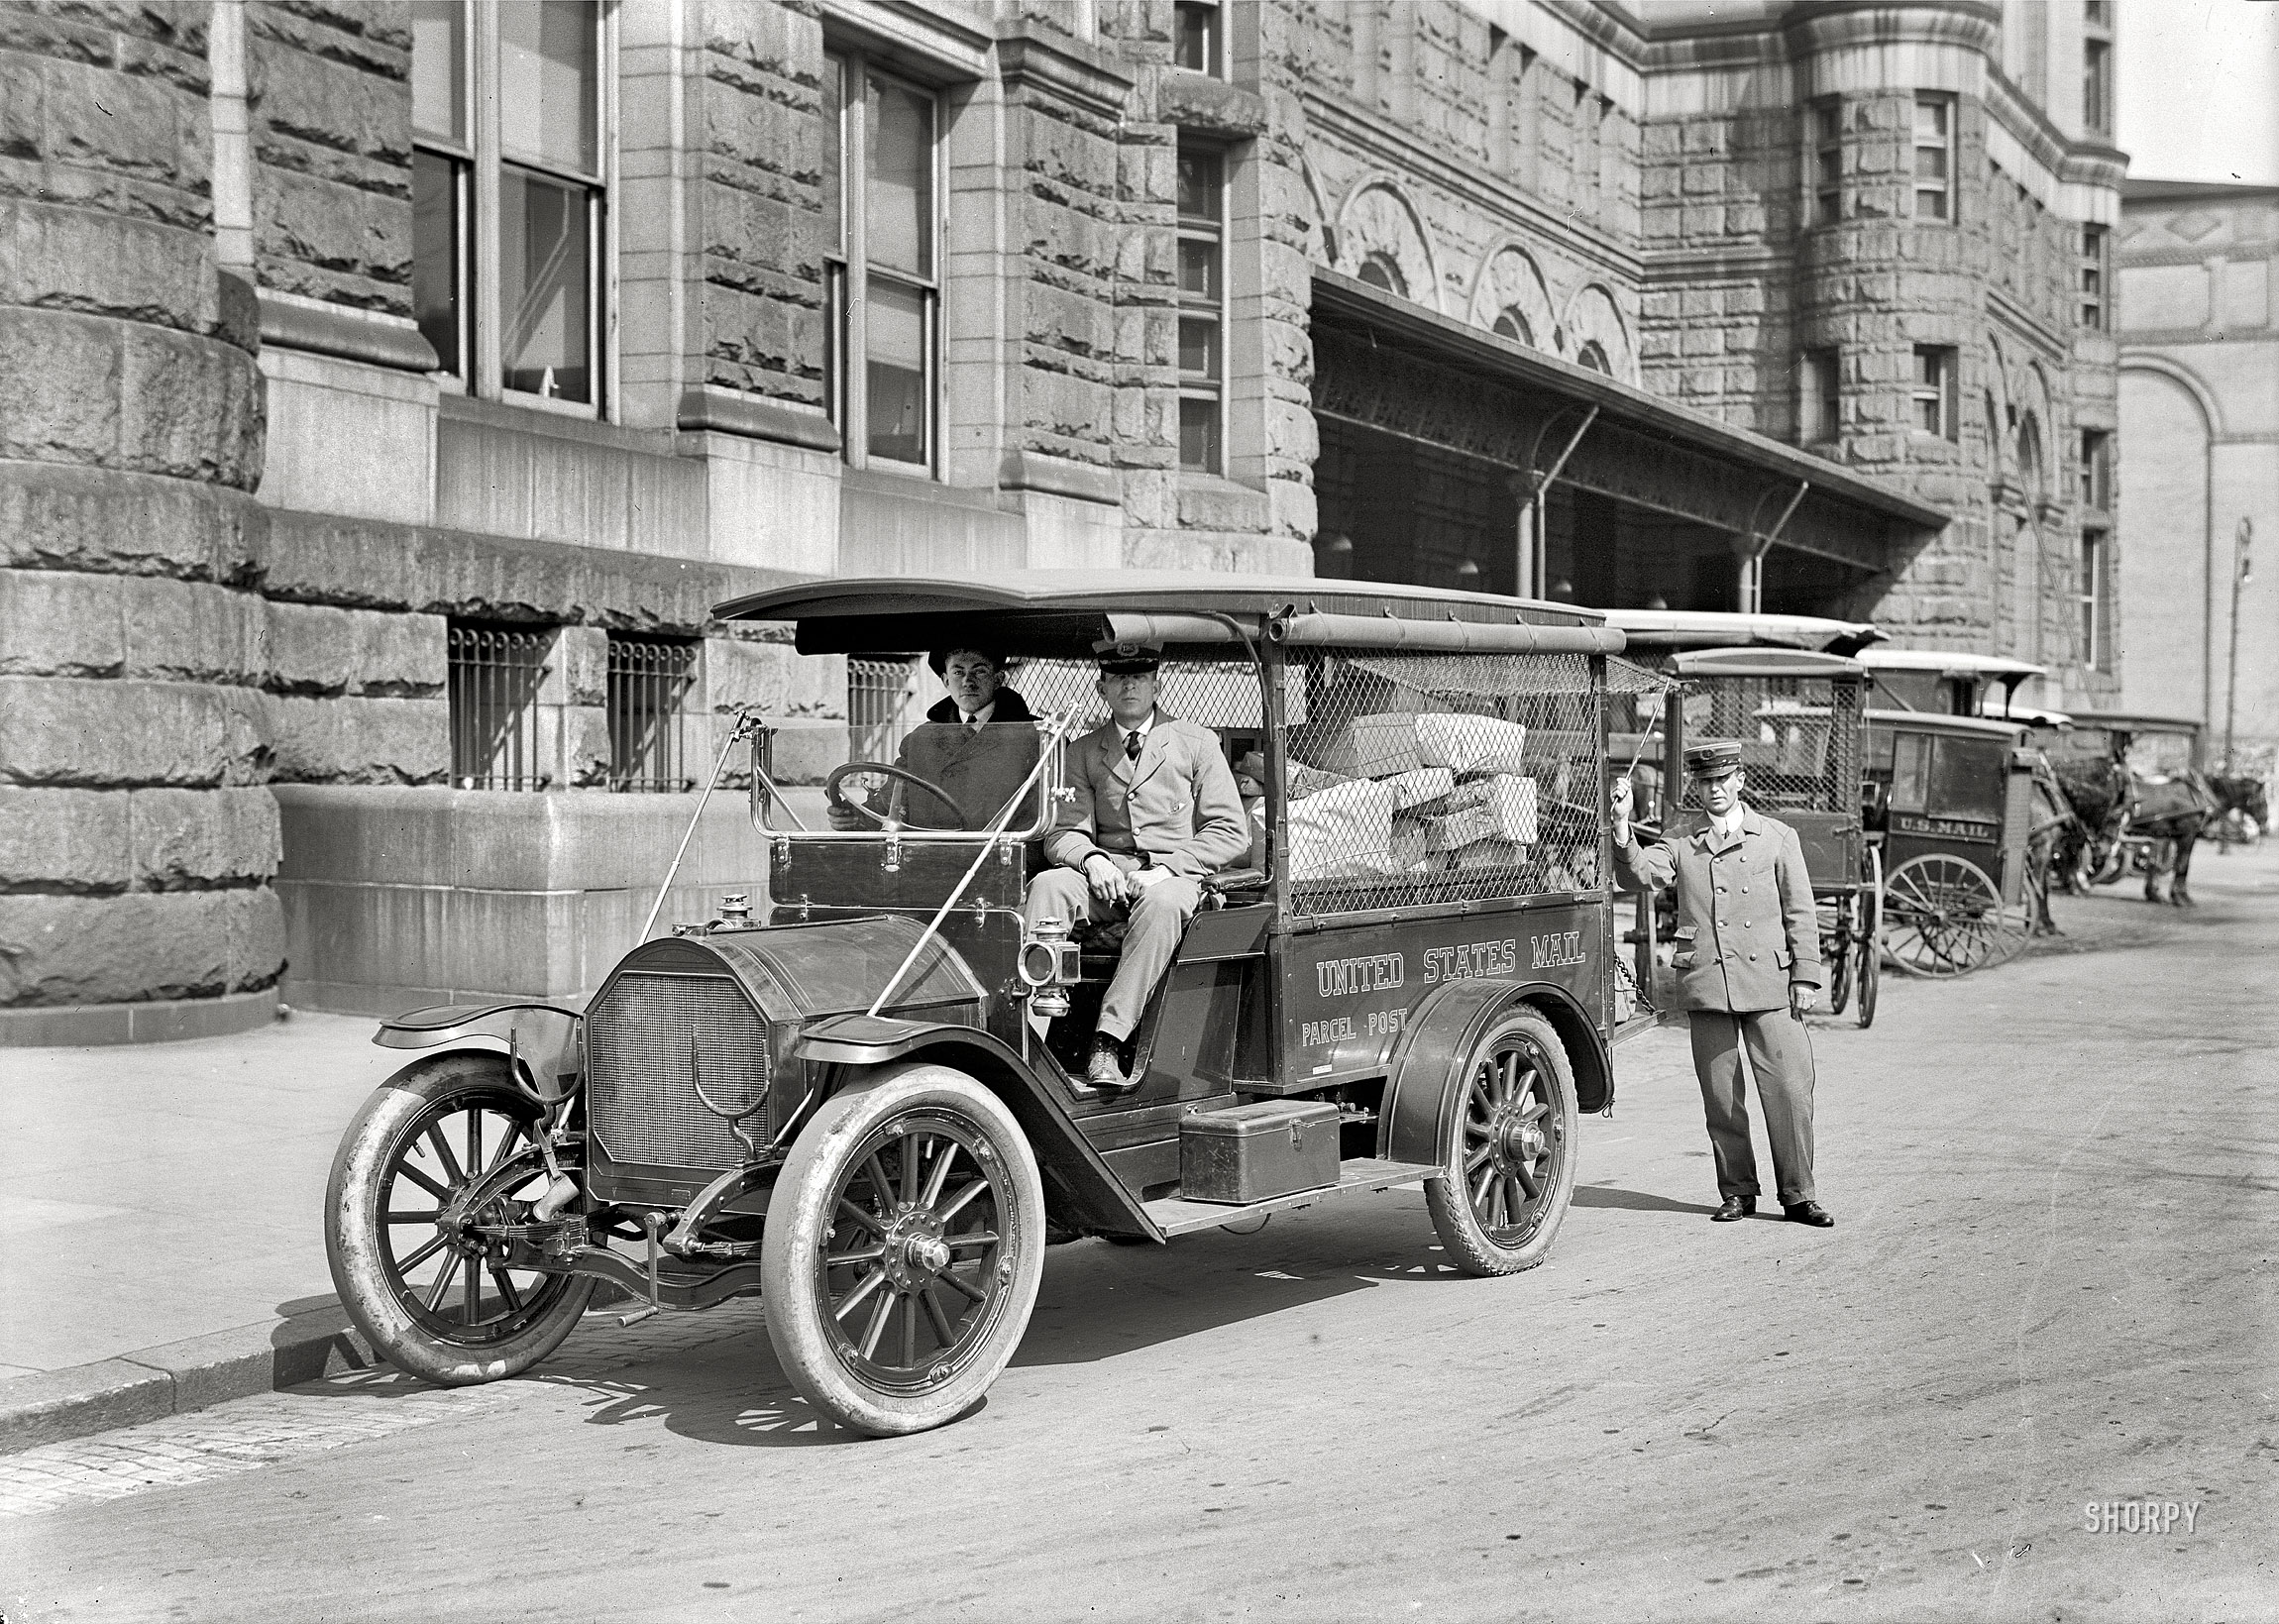 Washington, D.C., 1914. "Post Office Department -- parcel post." A scene outside the post office on Pennsylvania Avenue in its final year of operations before it moved and the building became known as the Old Post Office. View full size.